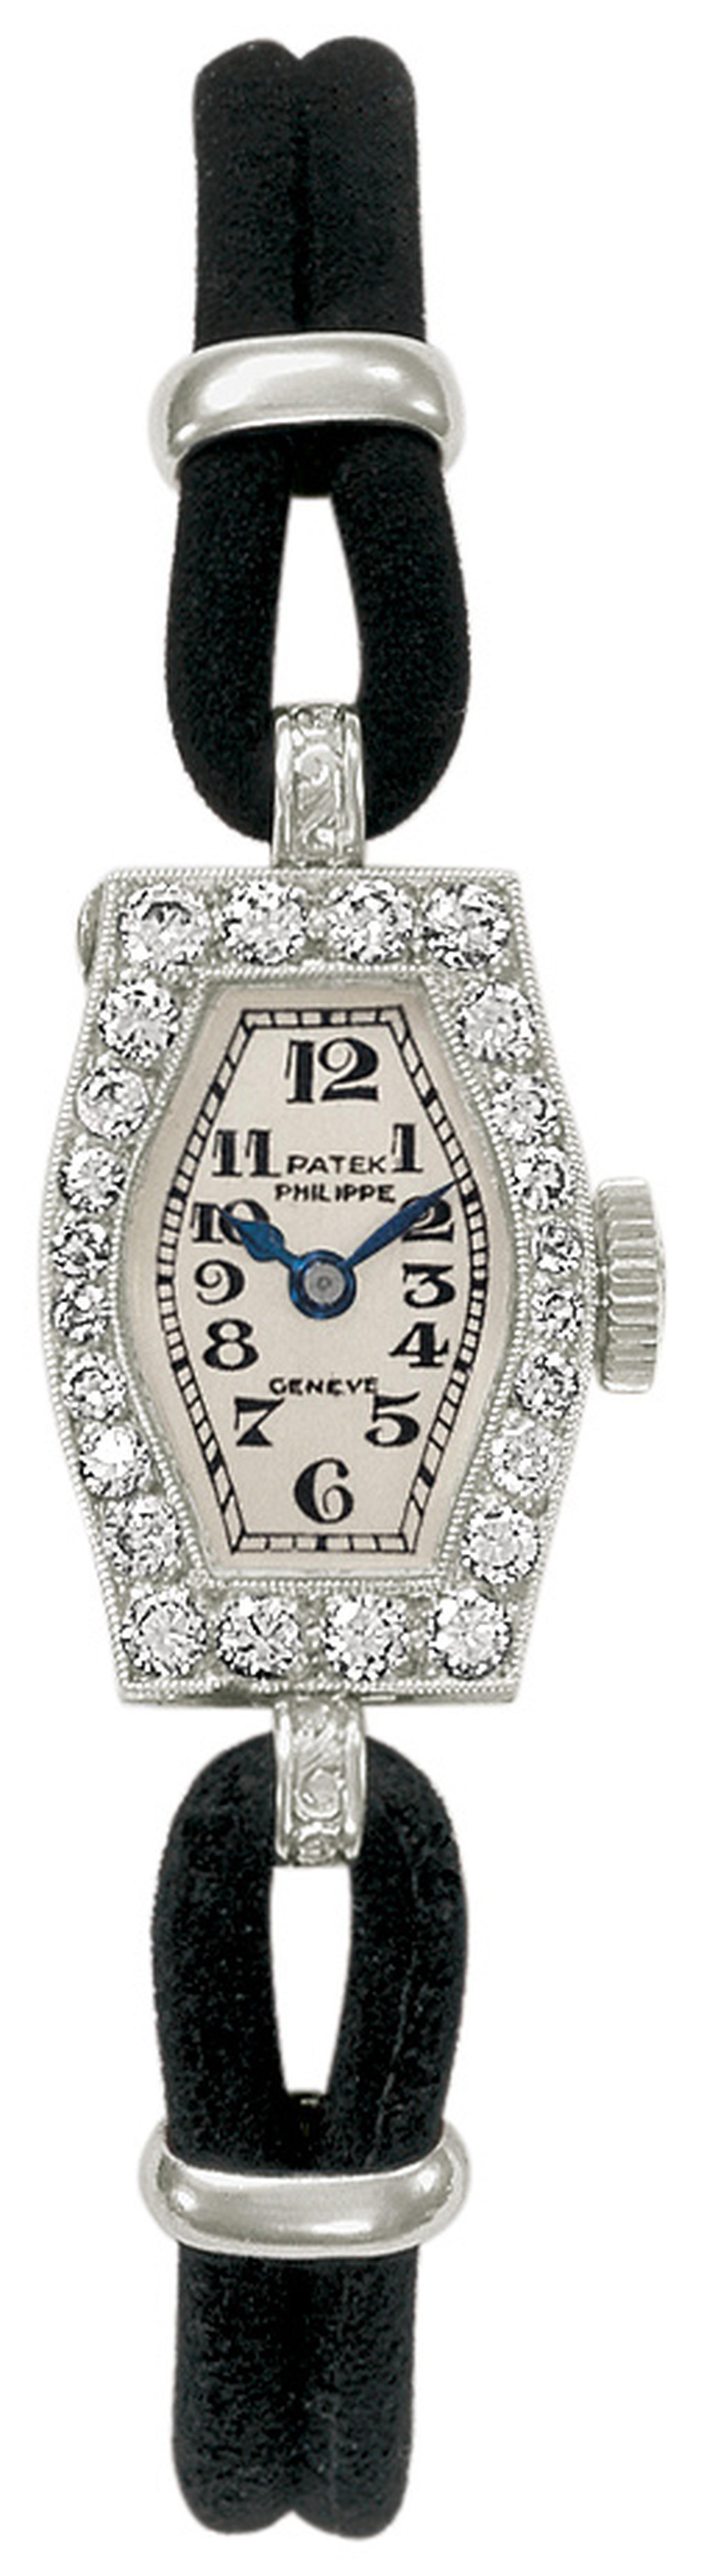 Patek-Philippe-P0587_a_100_collection-1925-40.jpg